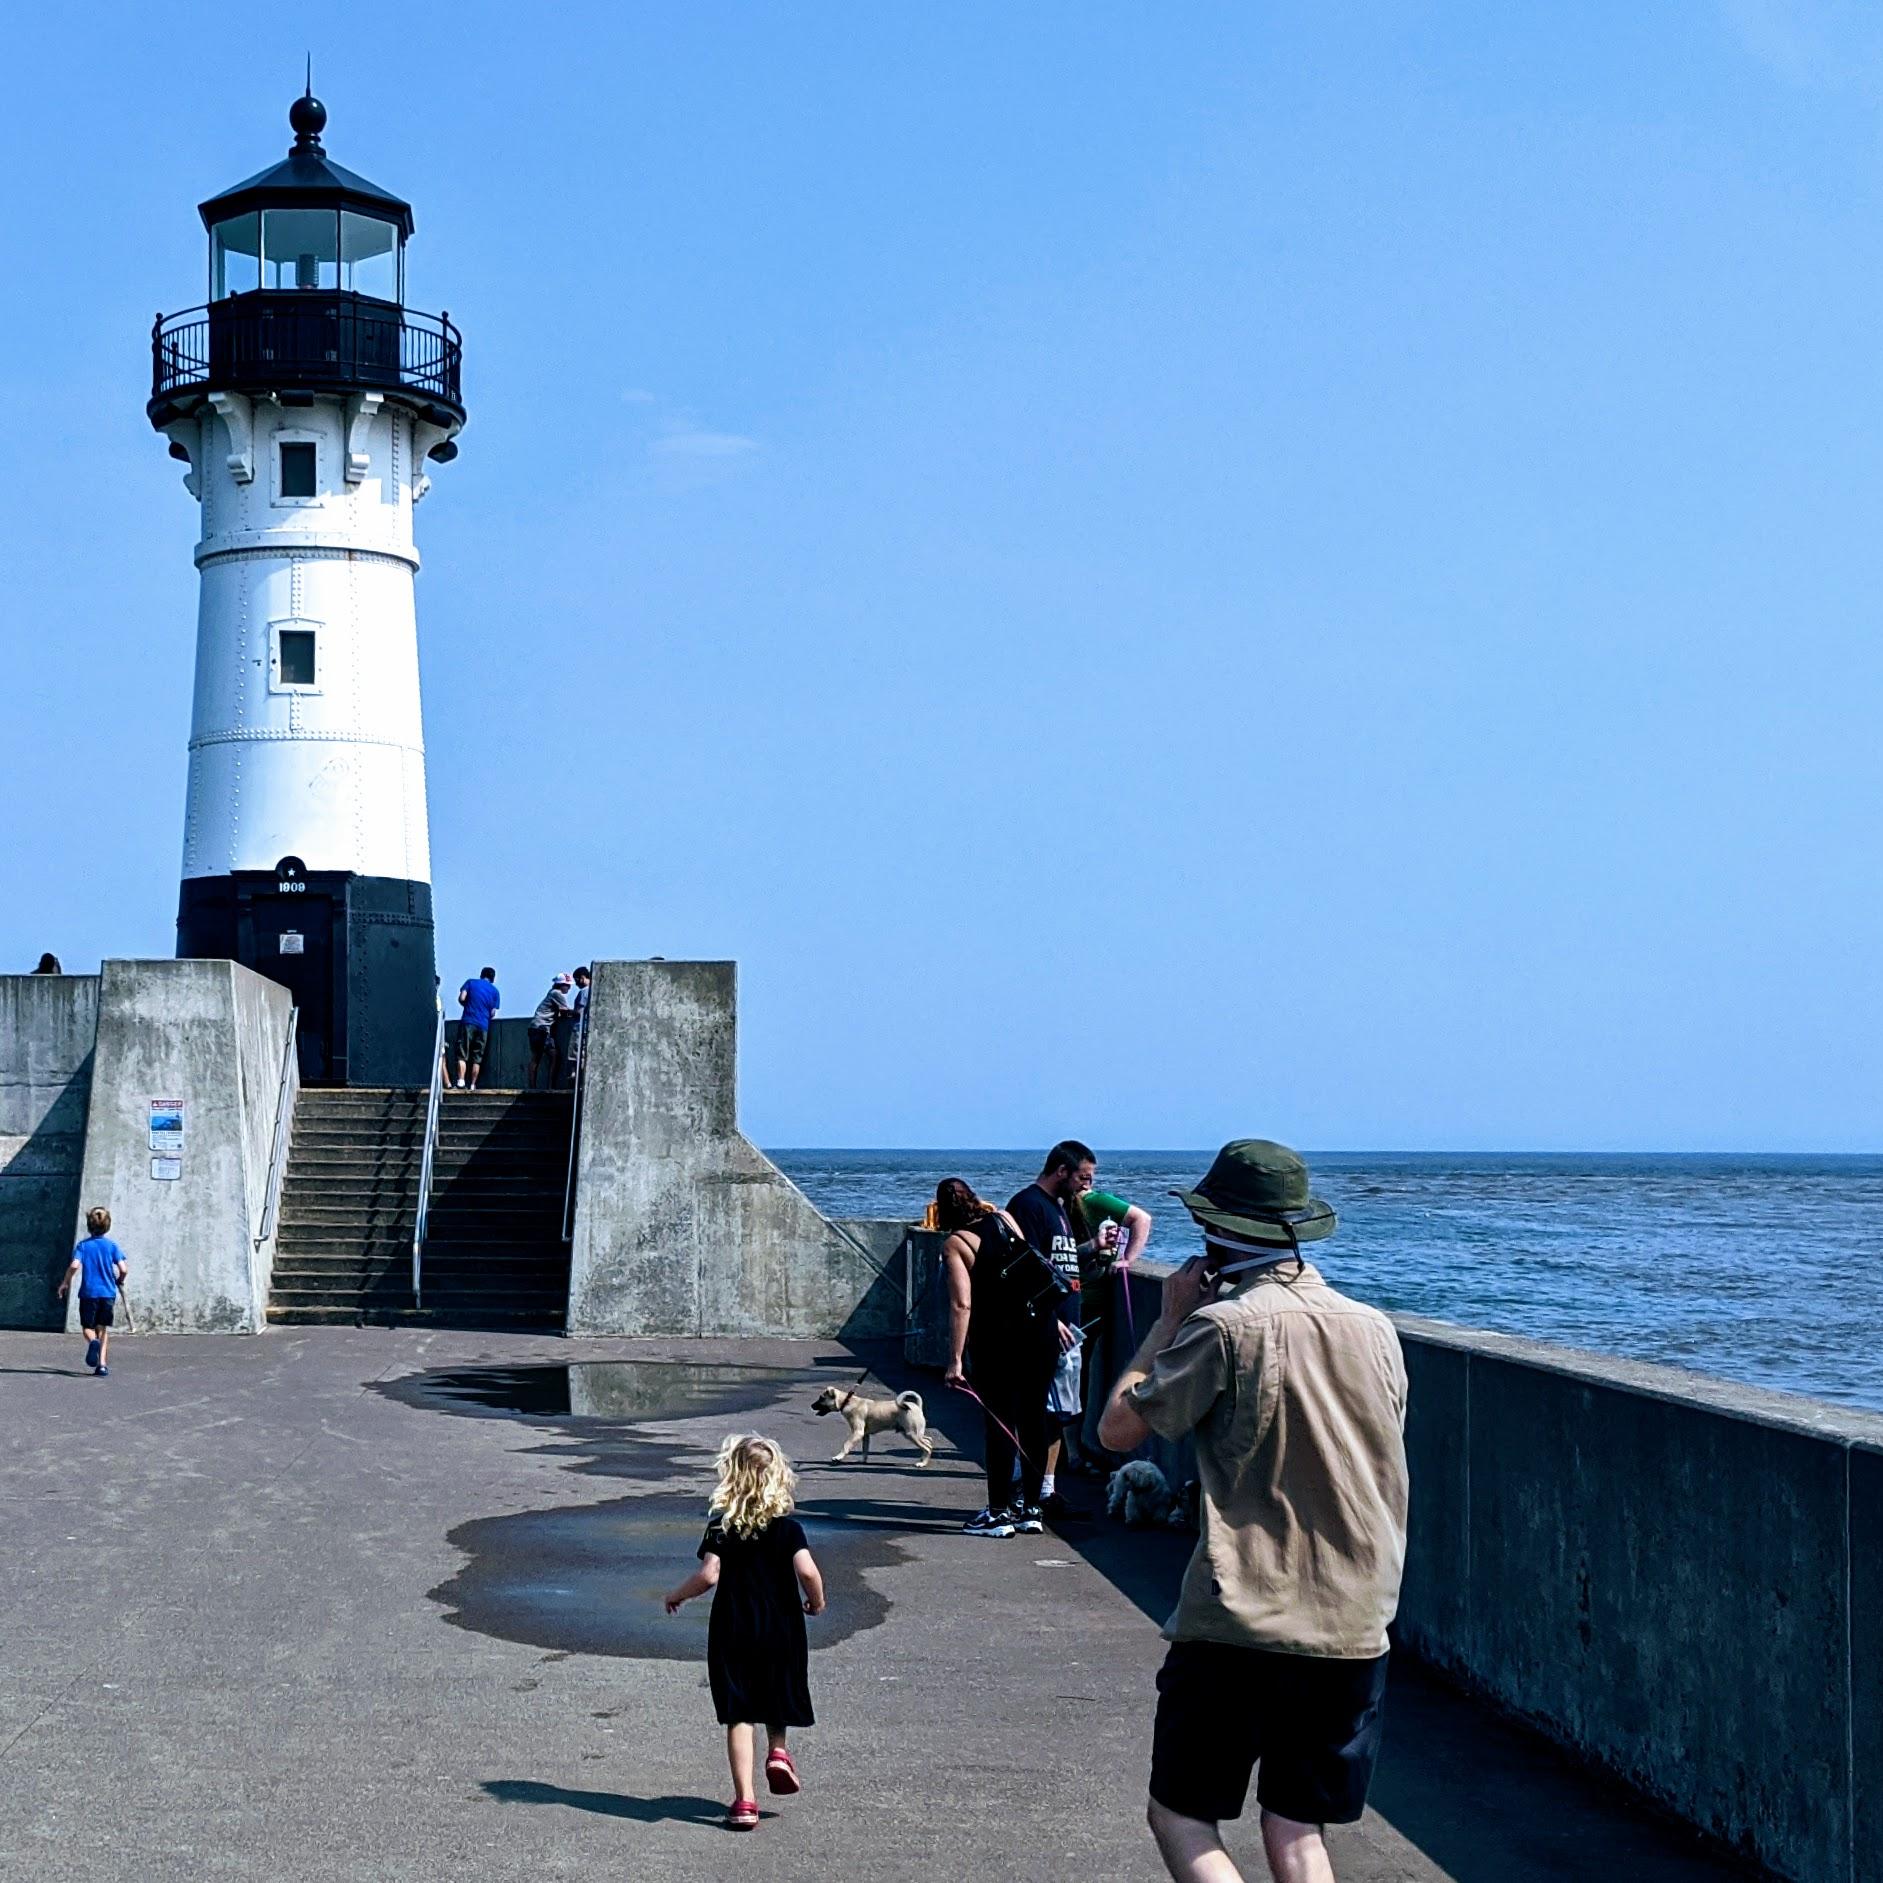 A photograph of the light house in Duluth, Minnesota.